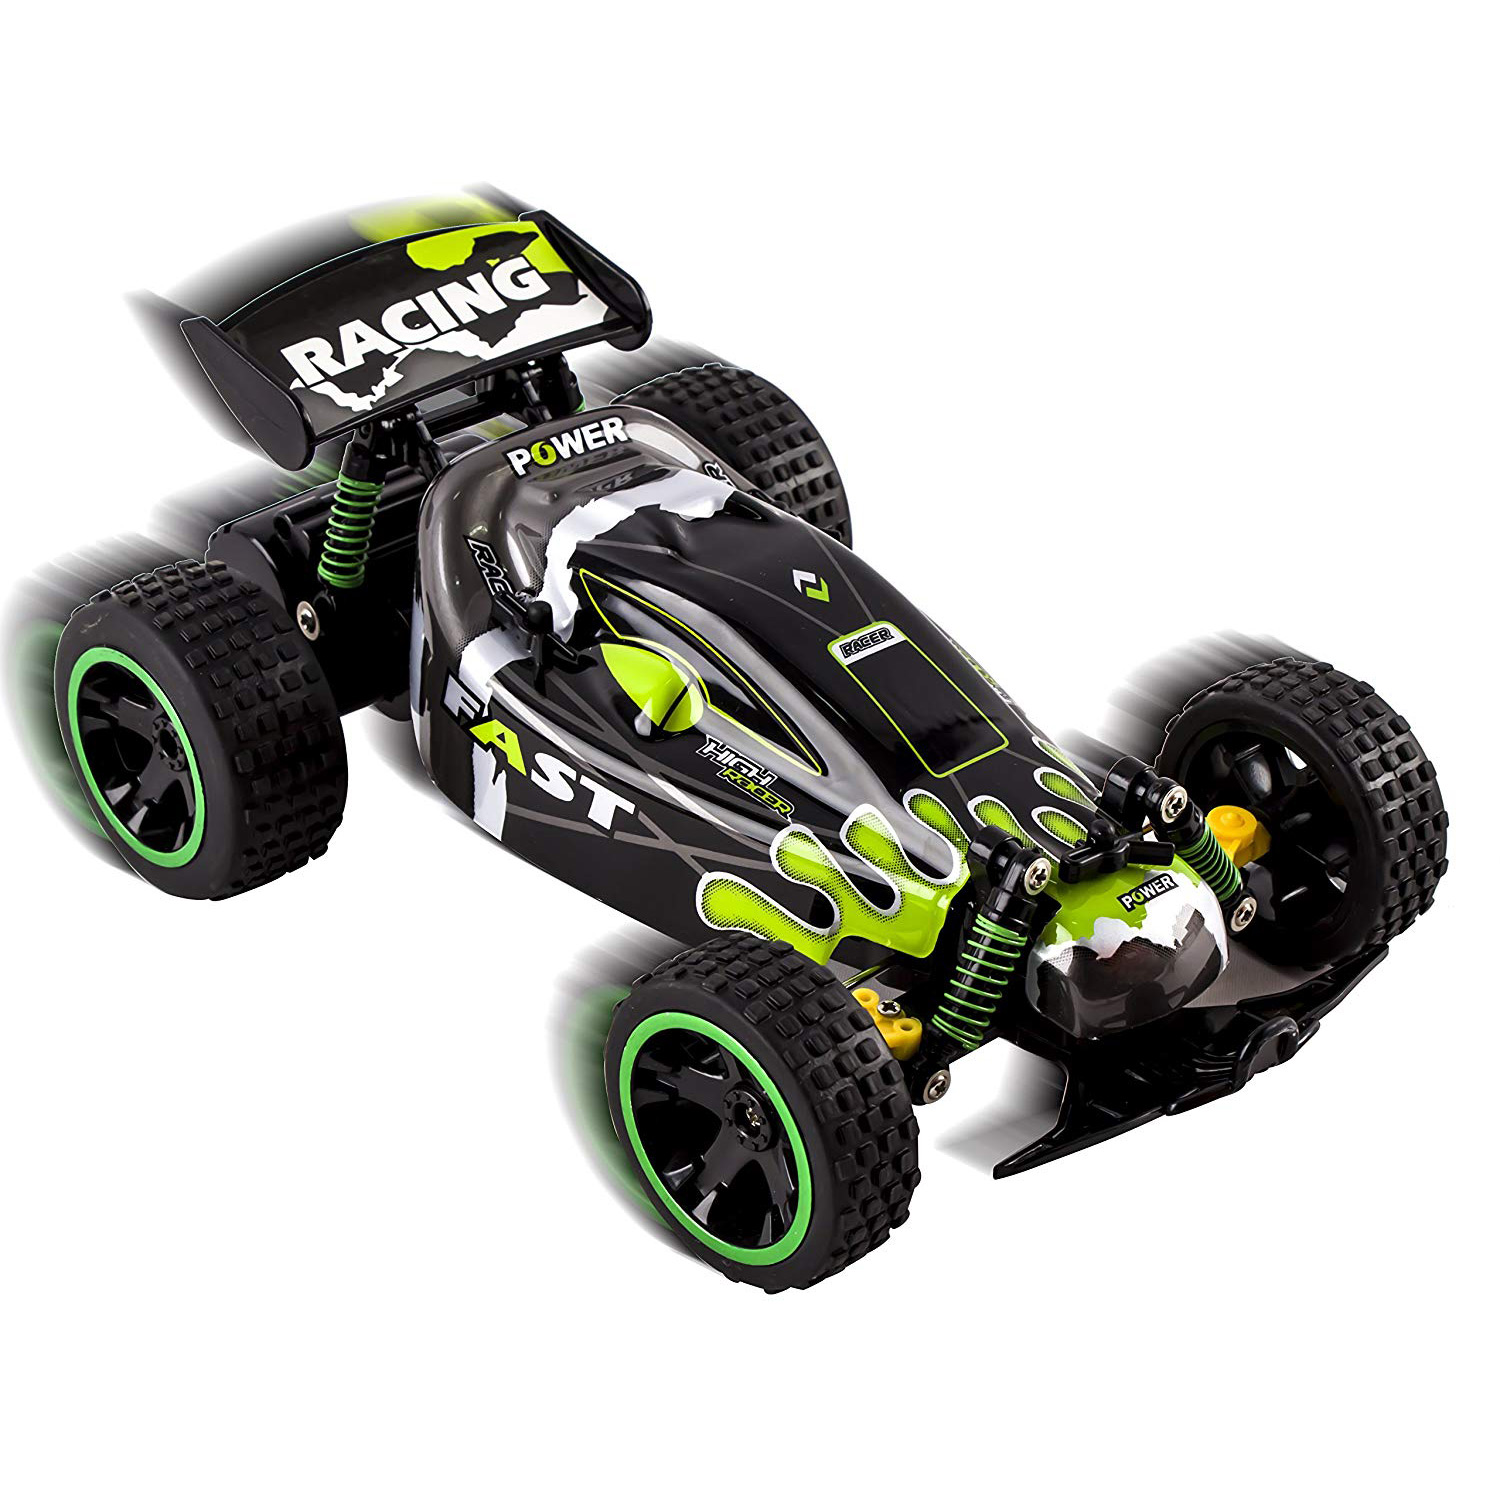 RC Buggy Truck 24Ghz System 118 Scale Remote Control High Speed Power With Working Off-Road Suspension Ready to Run Indoor And Outdoor Radio Car Toy Green